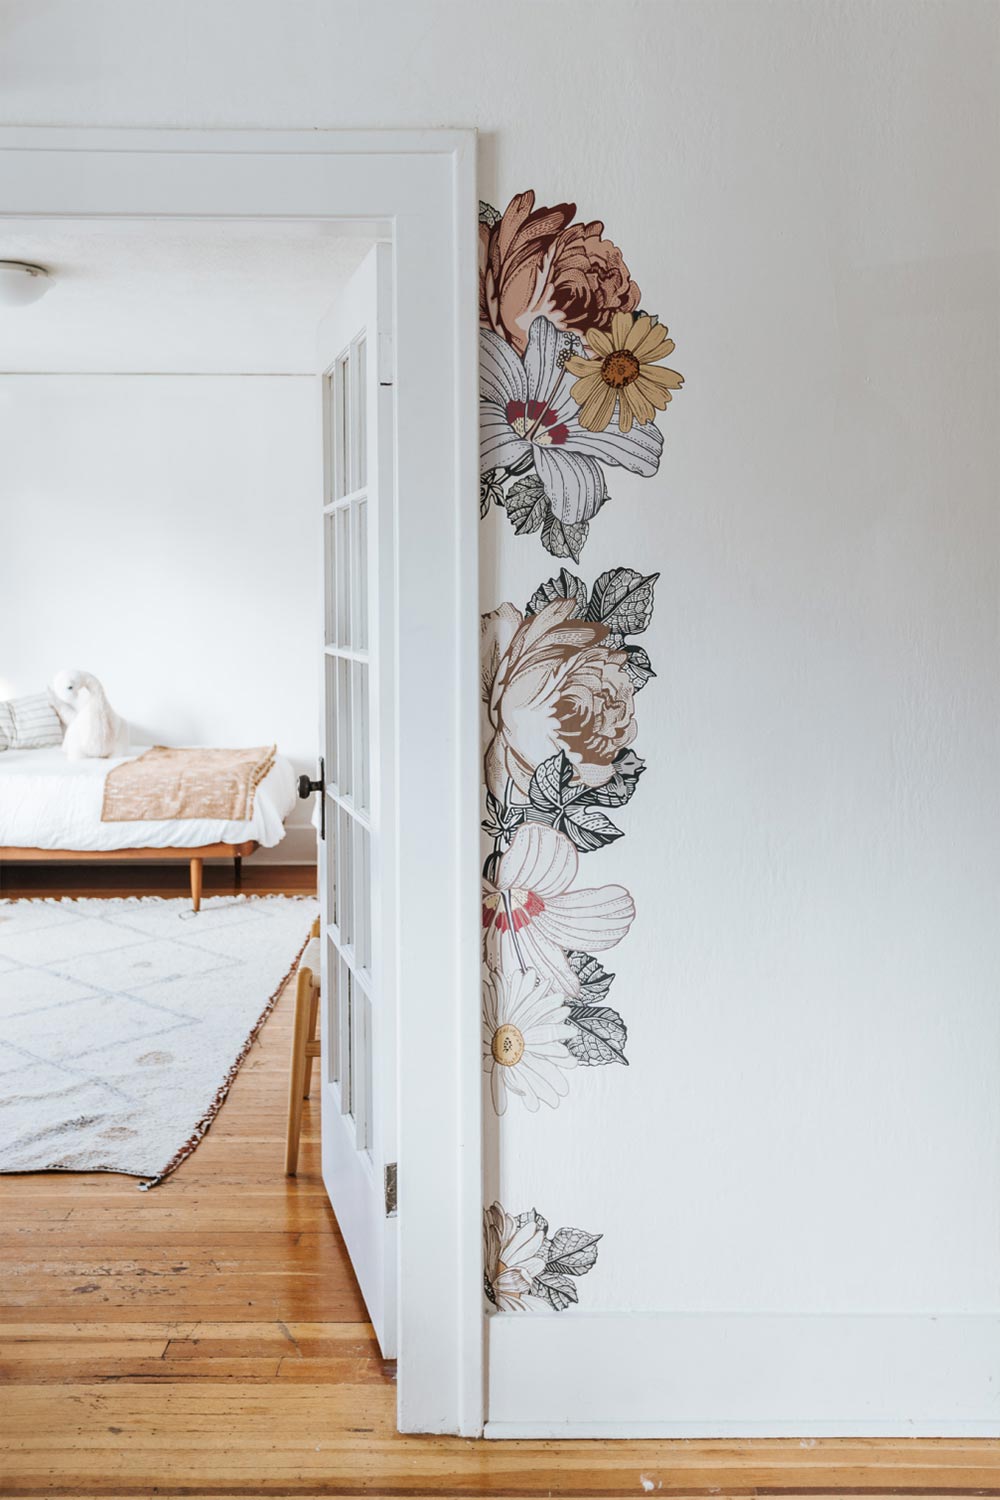 Prairie Floral Wall Decals shown on the right frame of a door leading into a kids bedroom.